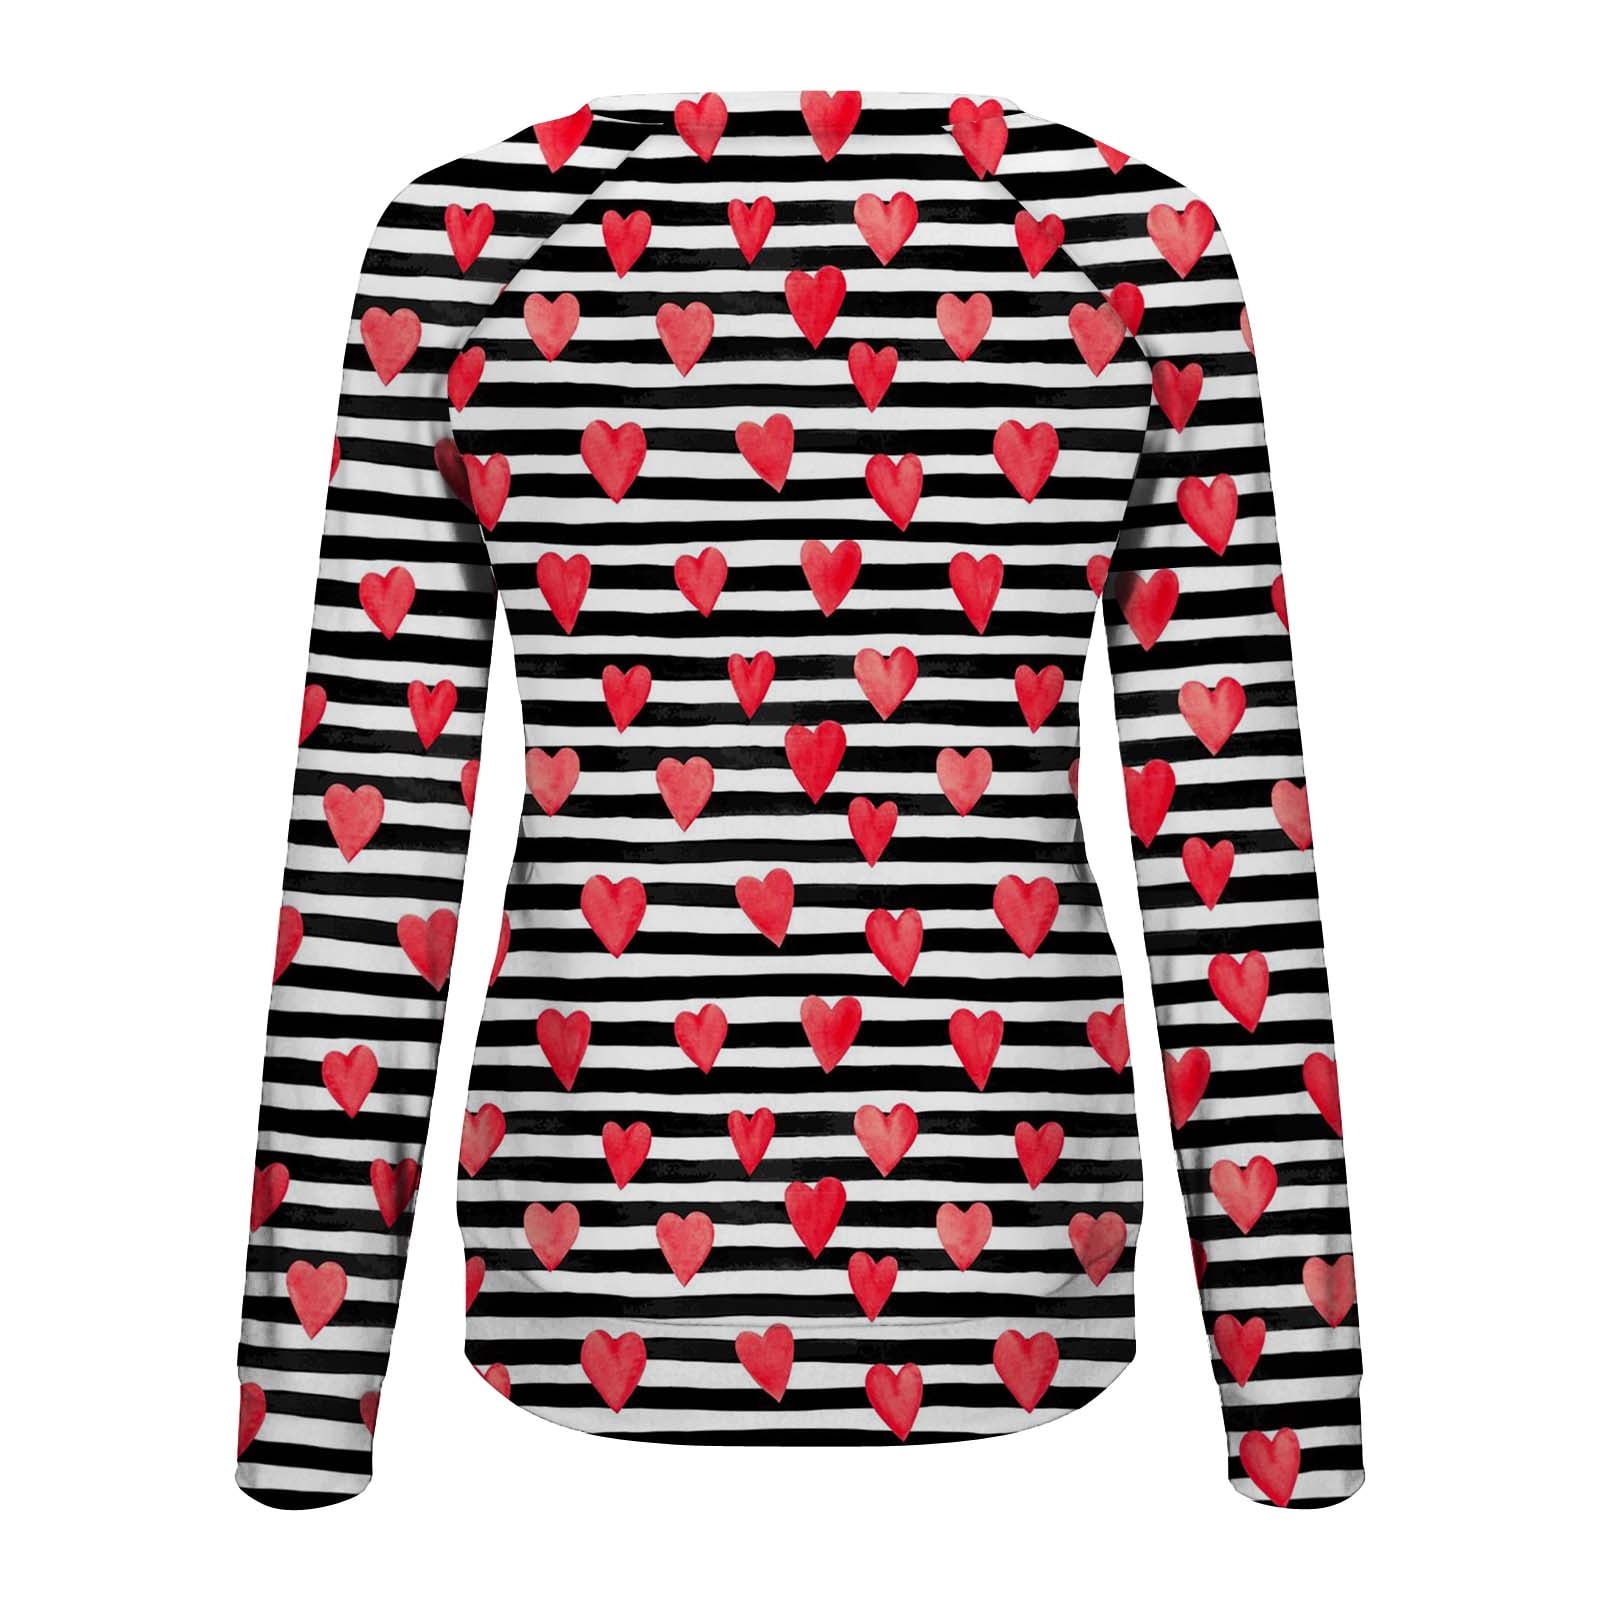 RQYYD Women Stripe Love Heart Graphic Sweatshirt Happy Valentine\'s Day  Pullover Tops Casual Loose Long Sleeve Crewneck Shirts Red XL